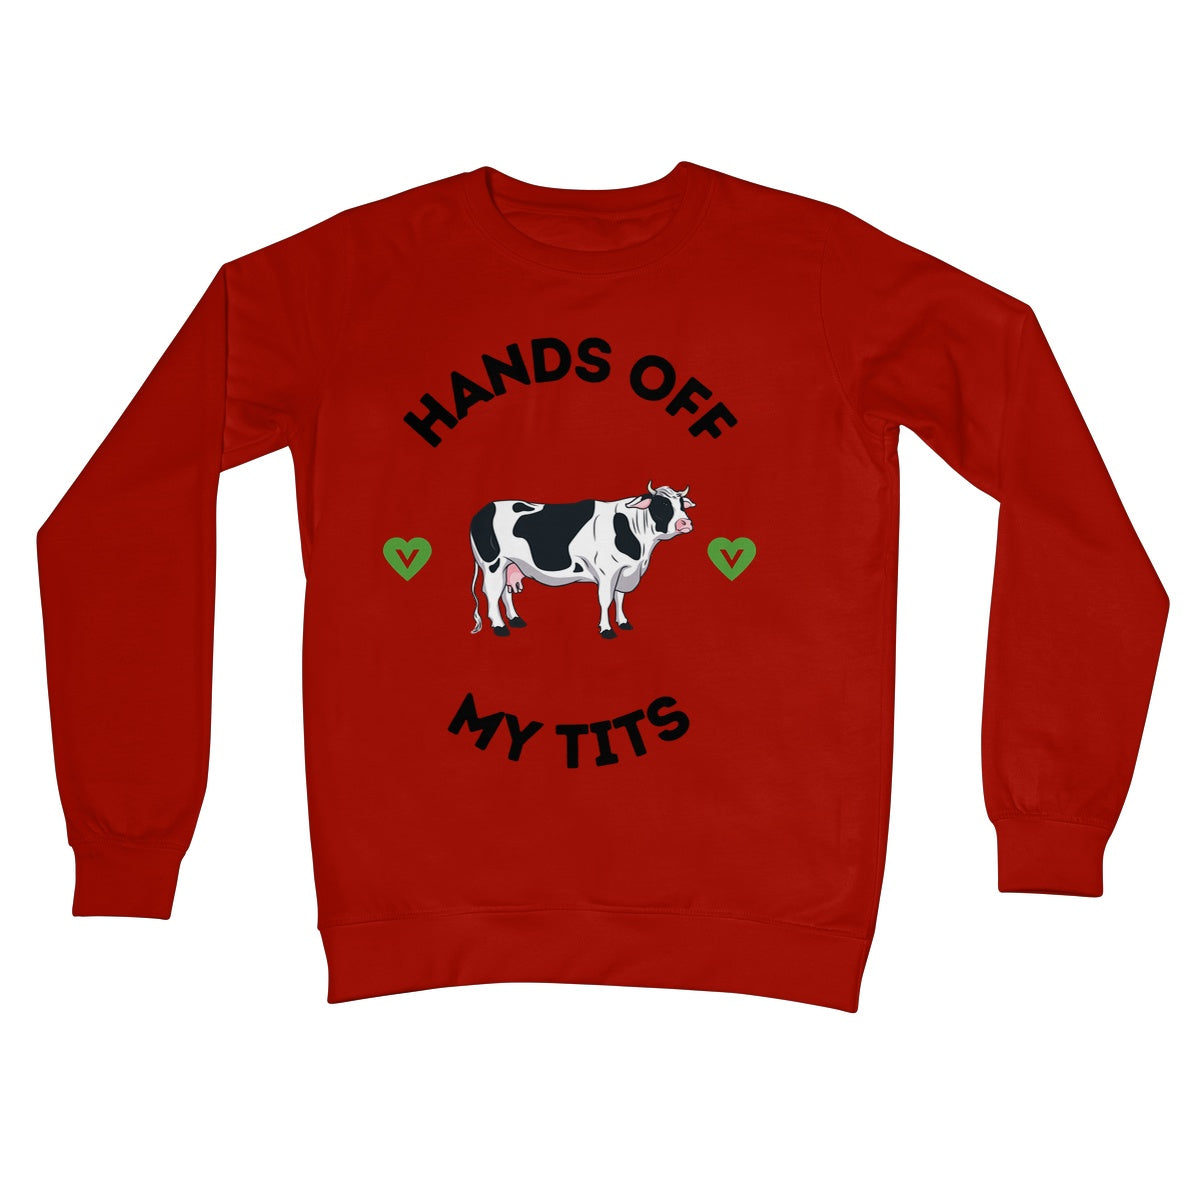 hands off my tits jumper red